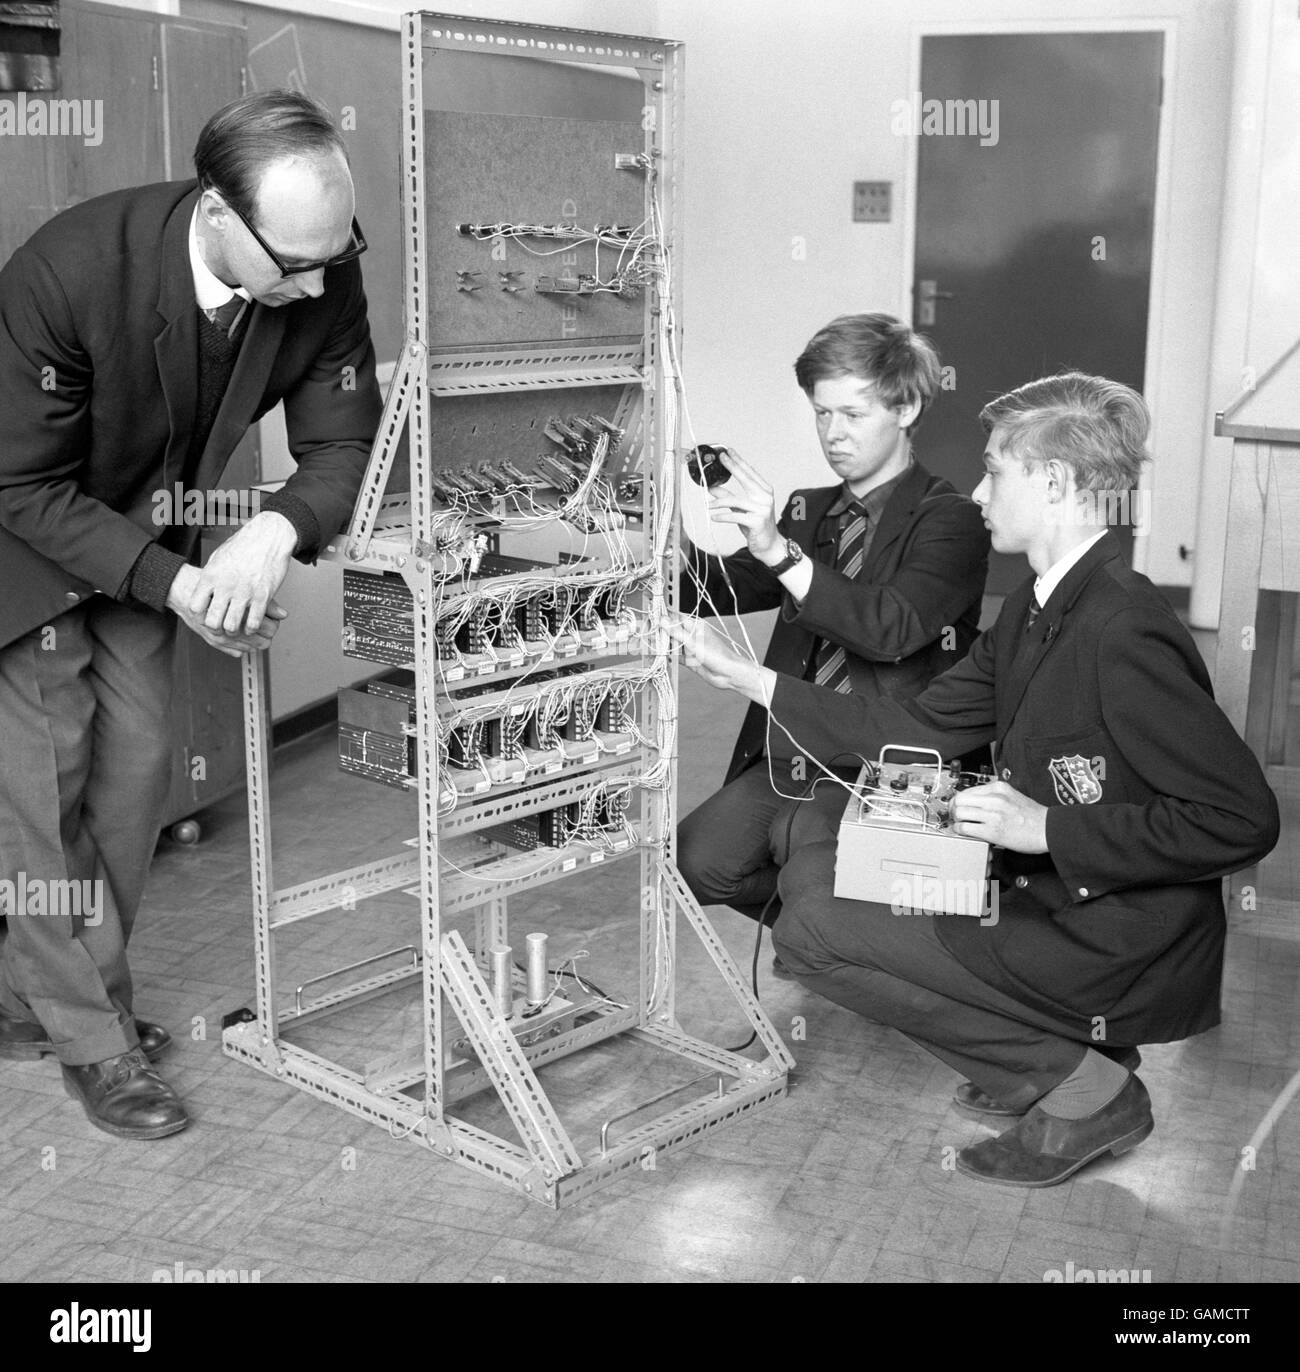 The 'Robot' teacher, a five-feet tall computer built by the sixth form boys at Chesterfield Grammar School in Derbyshire, was developed to give mathematics lessons. It was made from cheap parts from shops selling war disposal stock. Mr A. E. Yorke, the physics and chemistry teacher, introduced the computer 'Bardic' to two of his class. Stock Photo